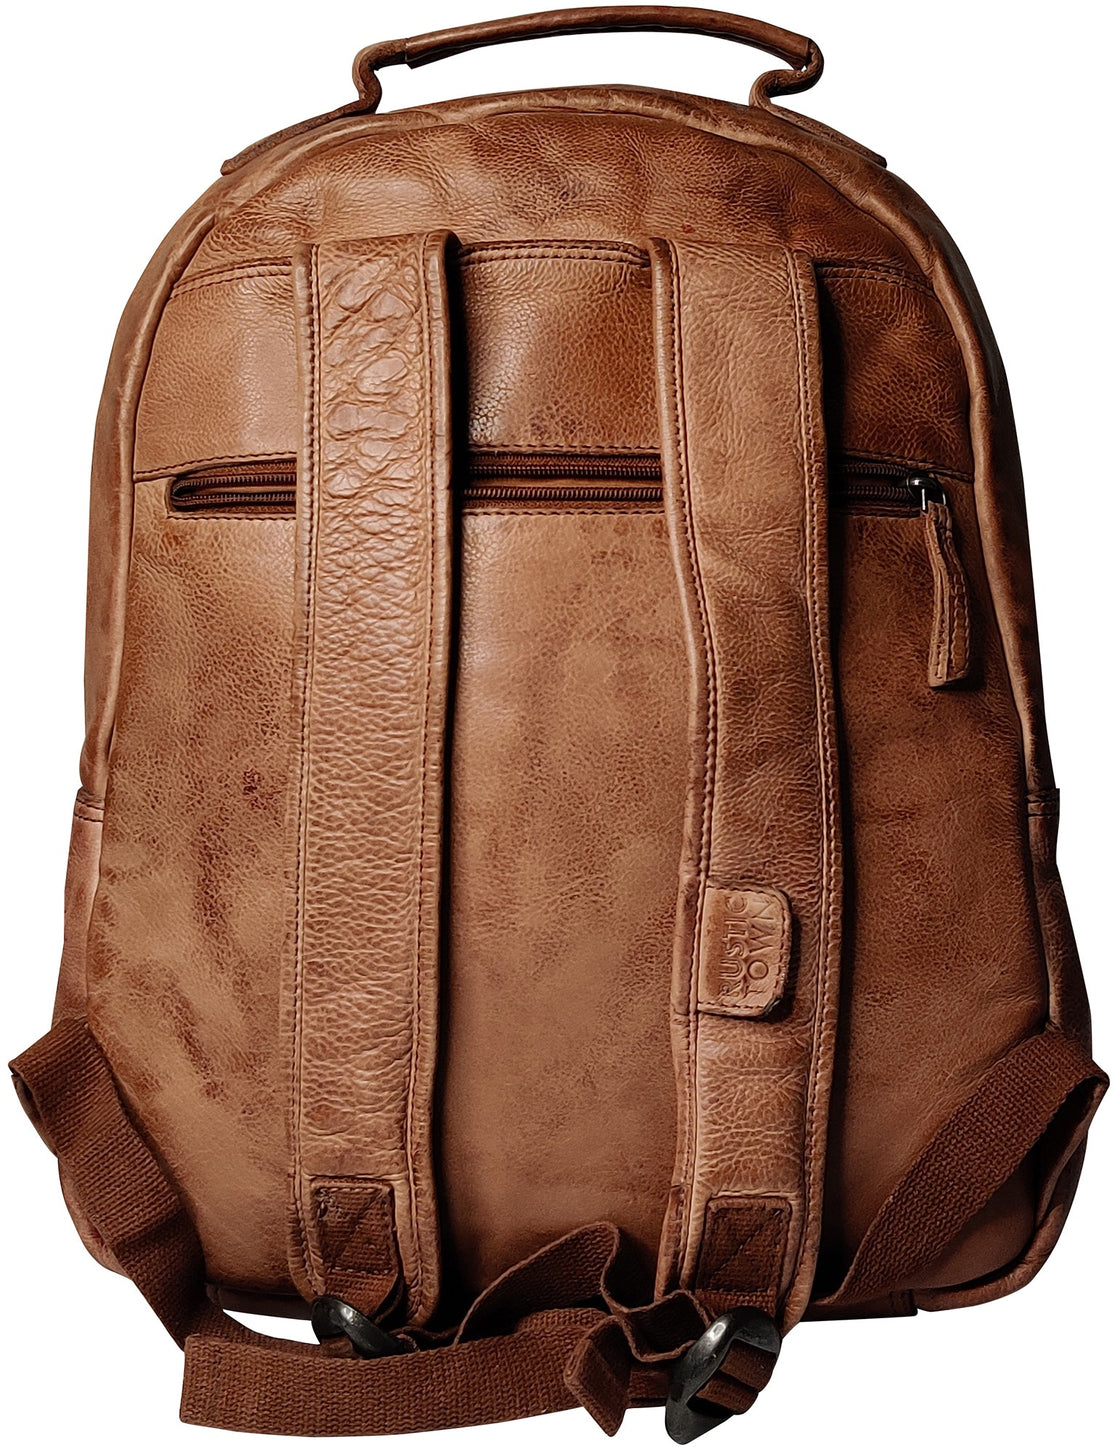 American Leather Co. Cleveland Leather Backpack - QVC.com